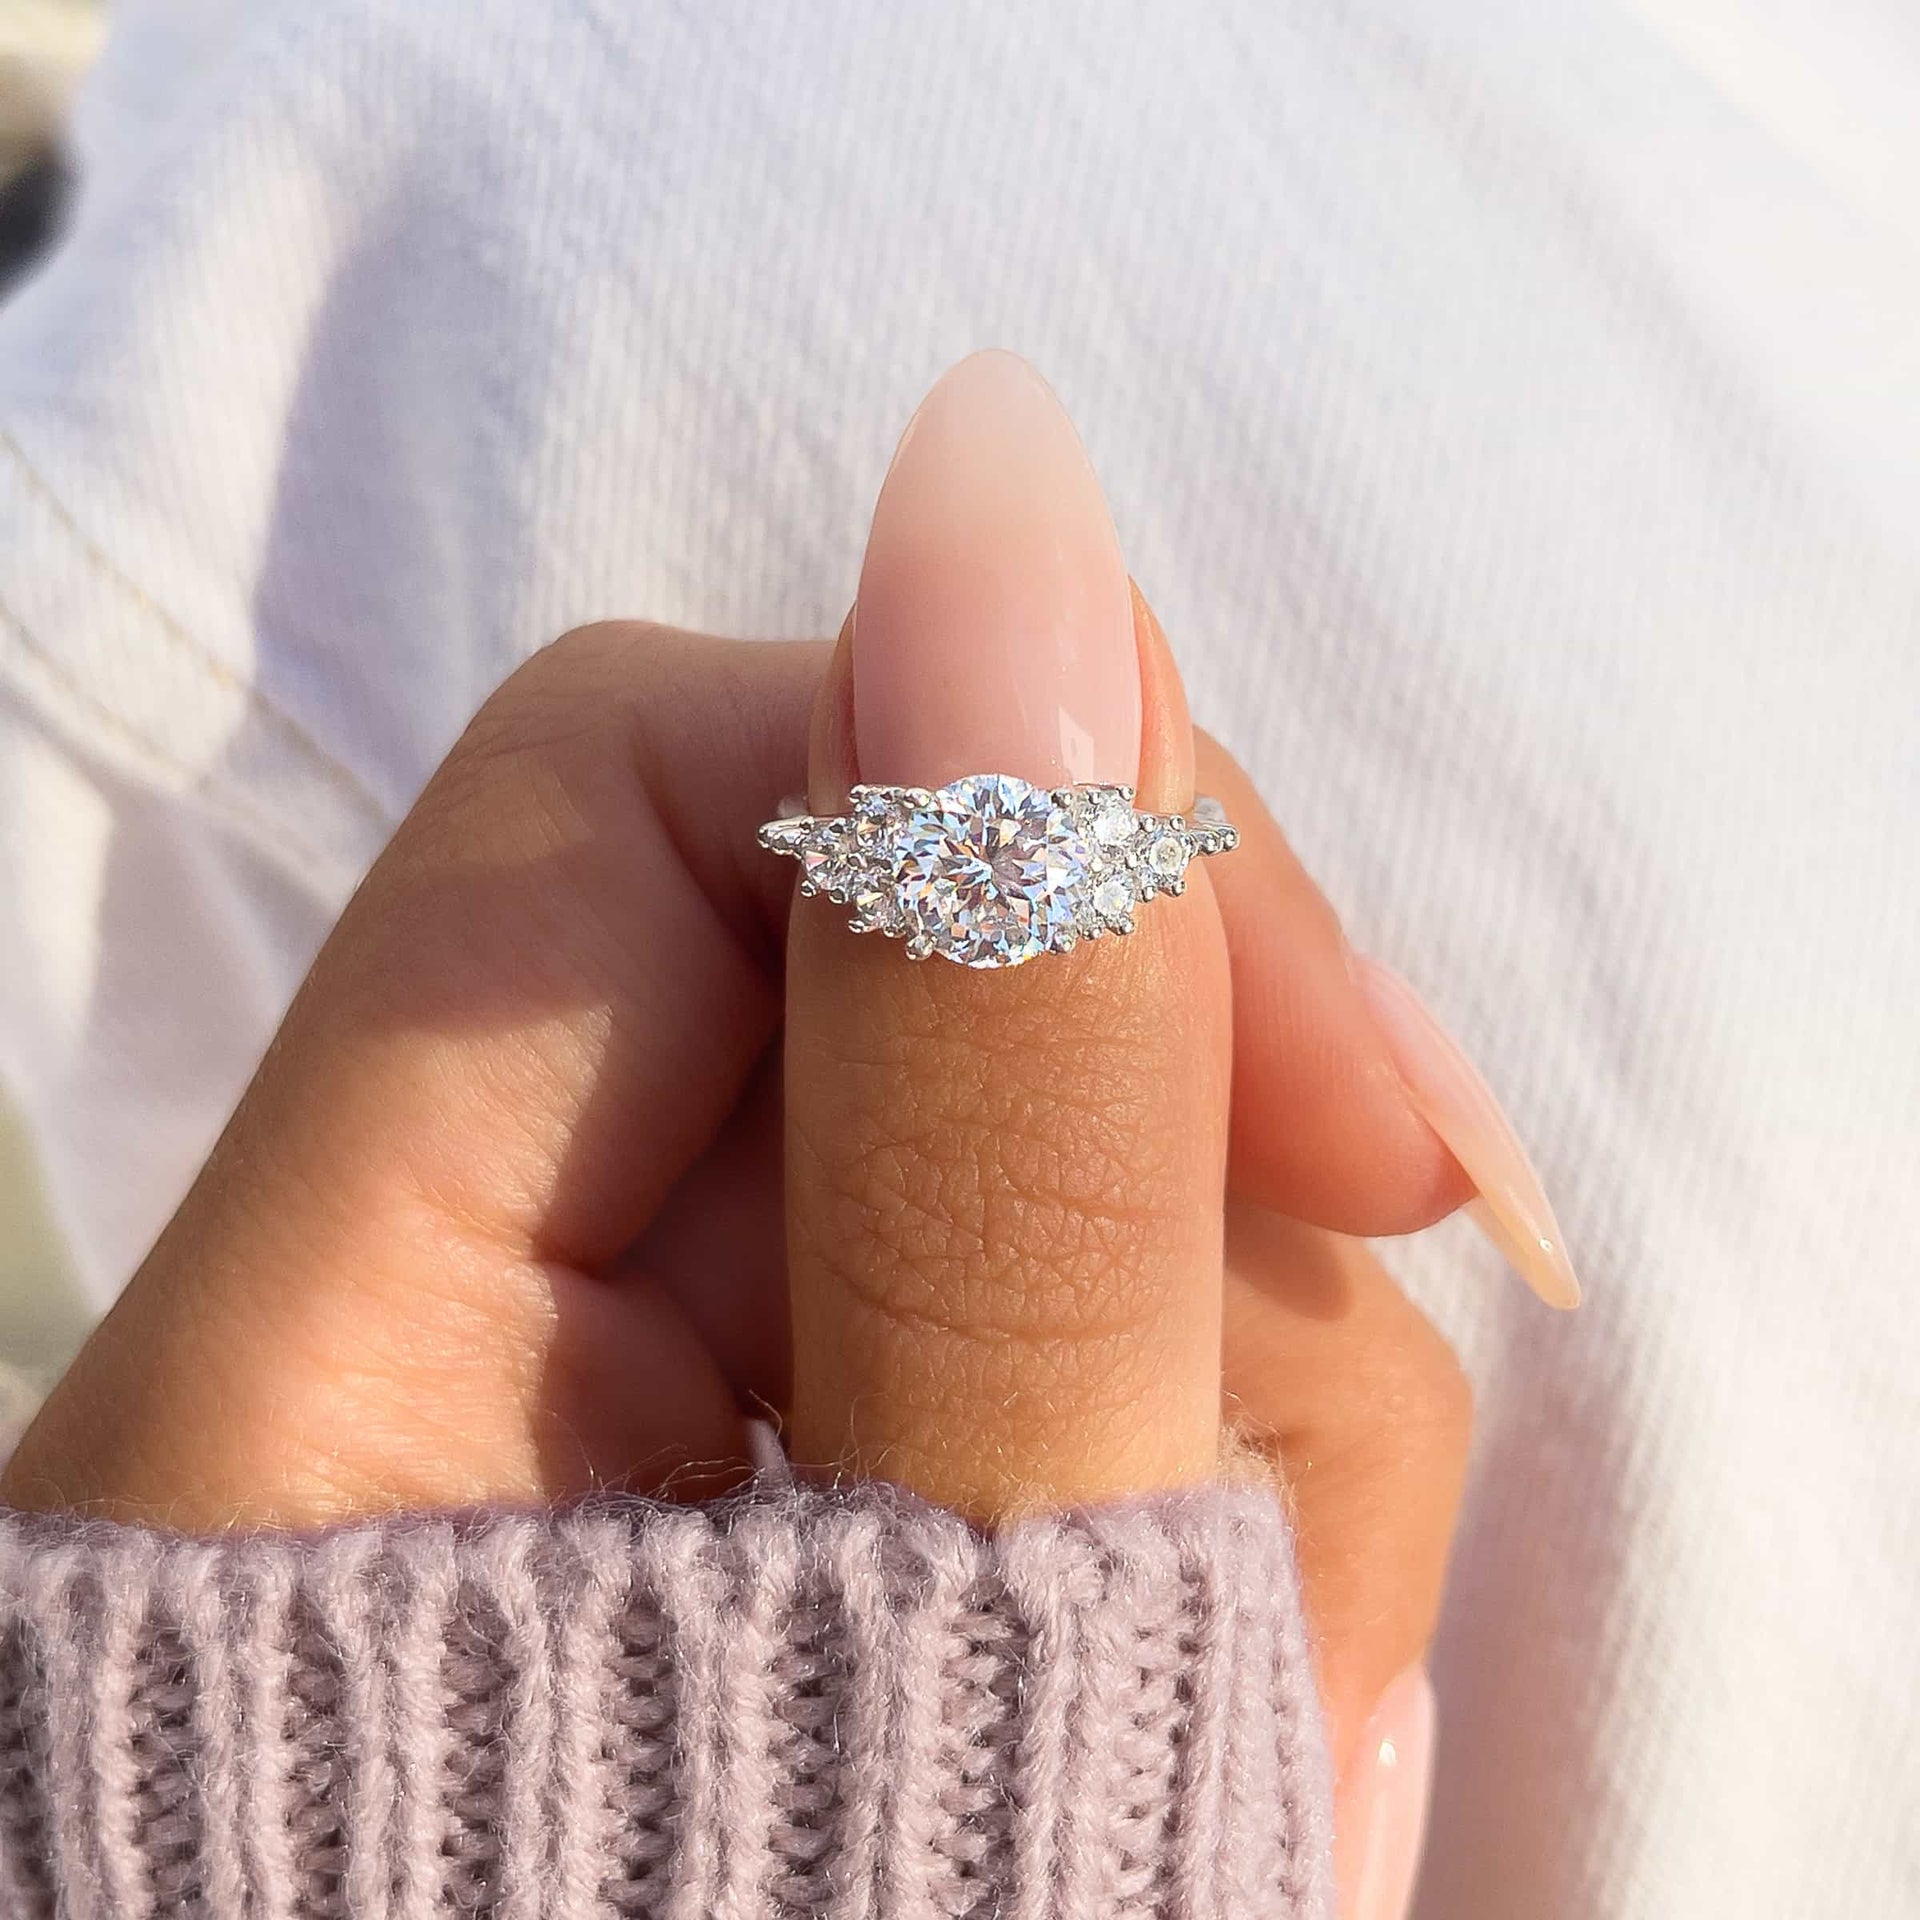 Beautiful silver engagement ring on woman's finger